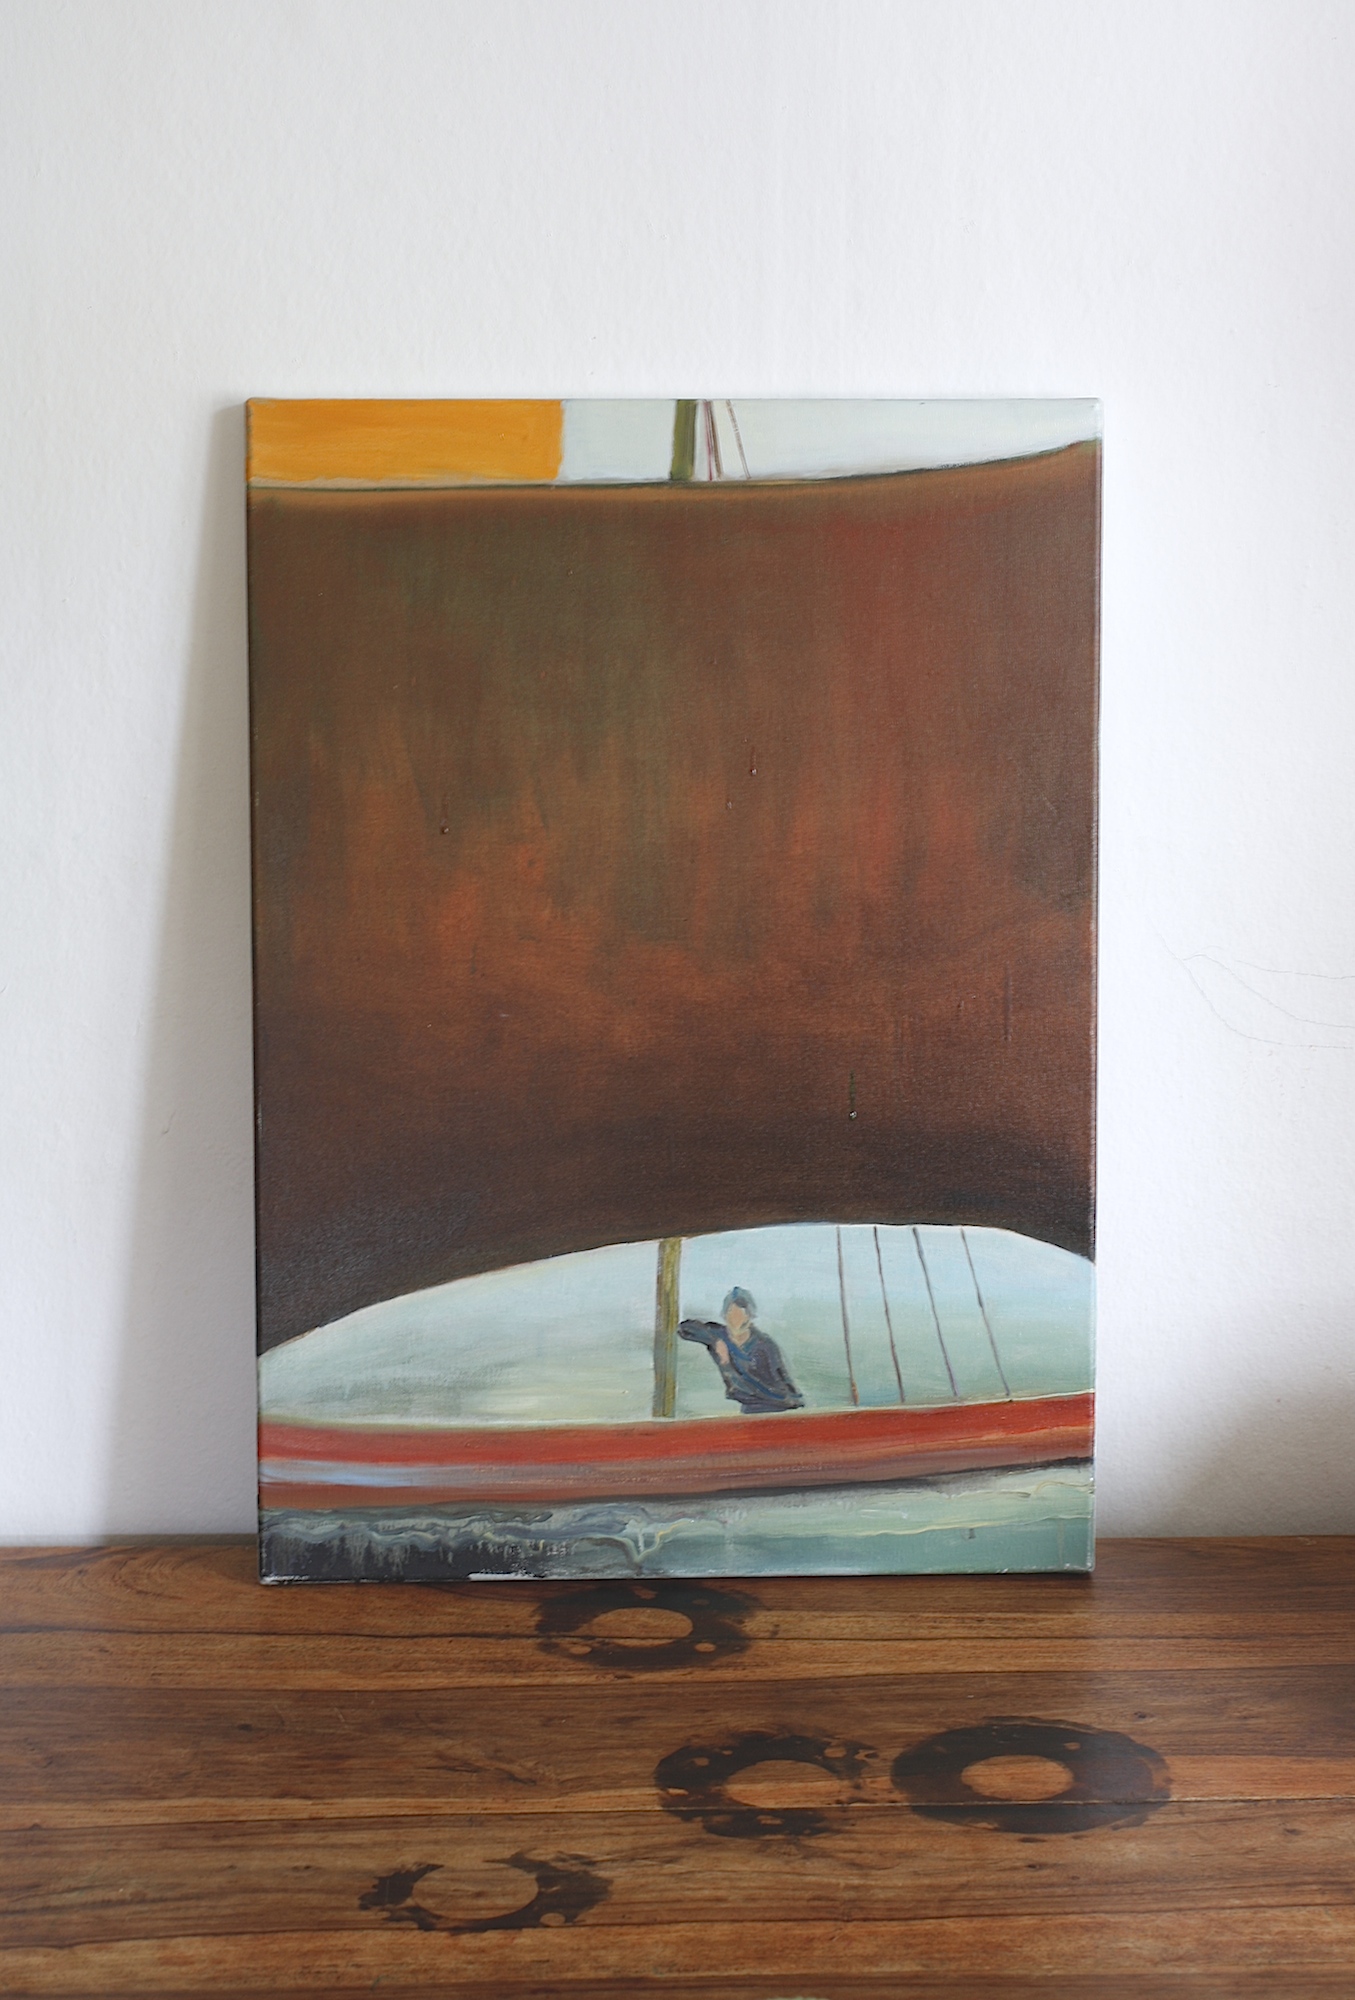 paintings, colorful, figurative, landscape, portraiture, bodies, oceans, people, sailing, transportation, brown, gold, grey, red, cotton-canvas, oil, boats, contemporary-art, danish, decorative, design, expressionism, interior, interior-design, men, modern, modern-art, nordic, scandinavien, ships, vessels, vivid, water, Buy original high quality art. Paintings, drawings, limited edition prints & posters by talented artists.